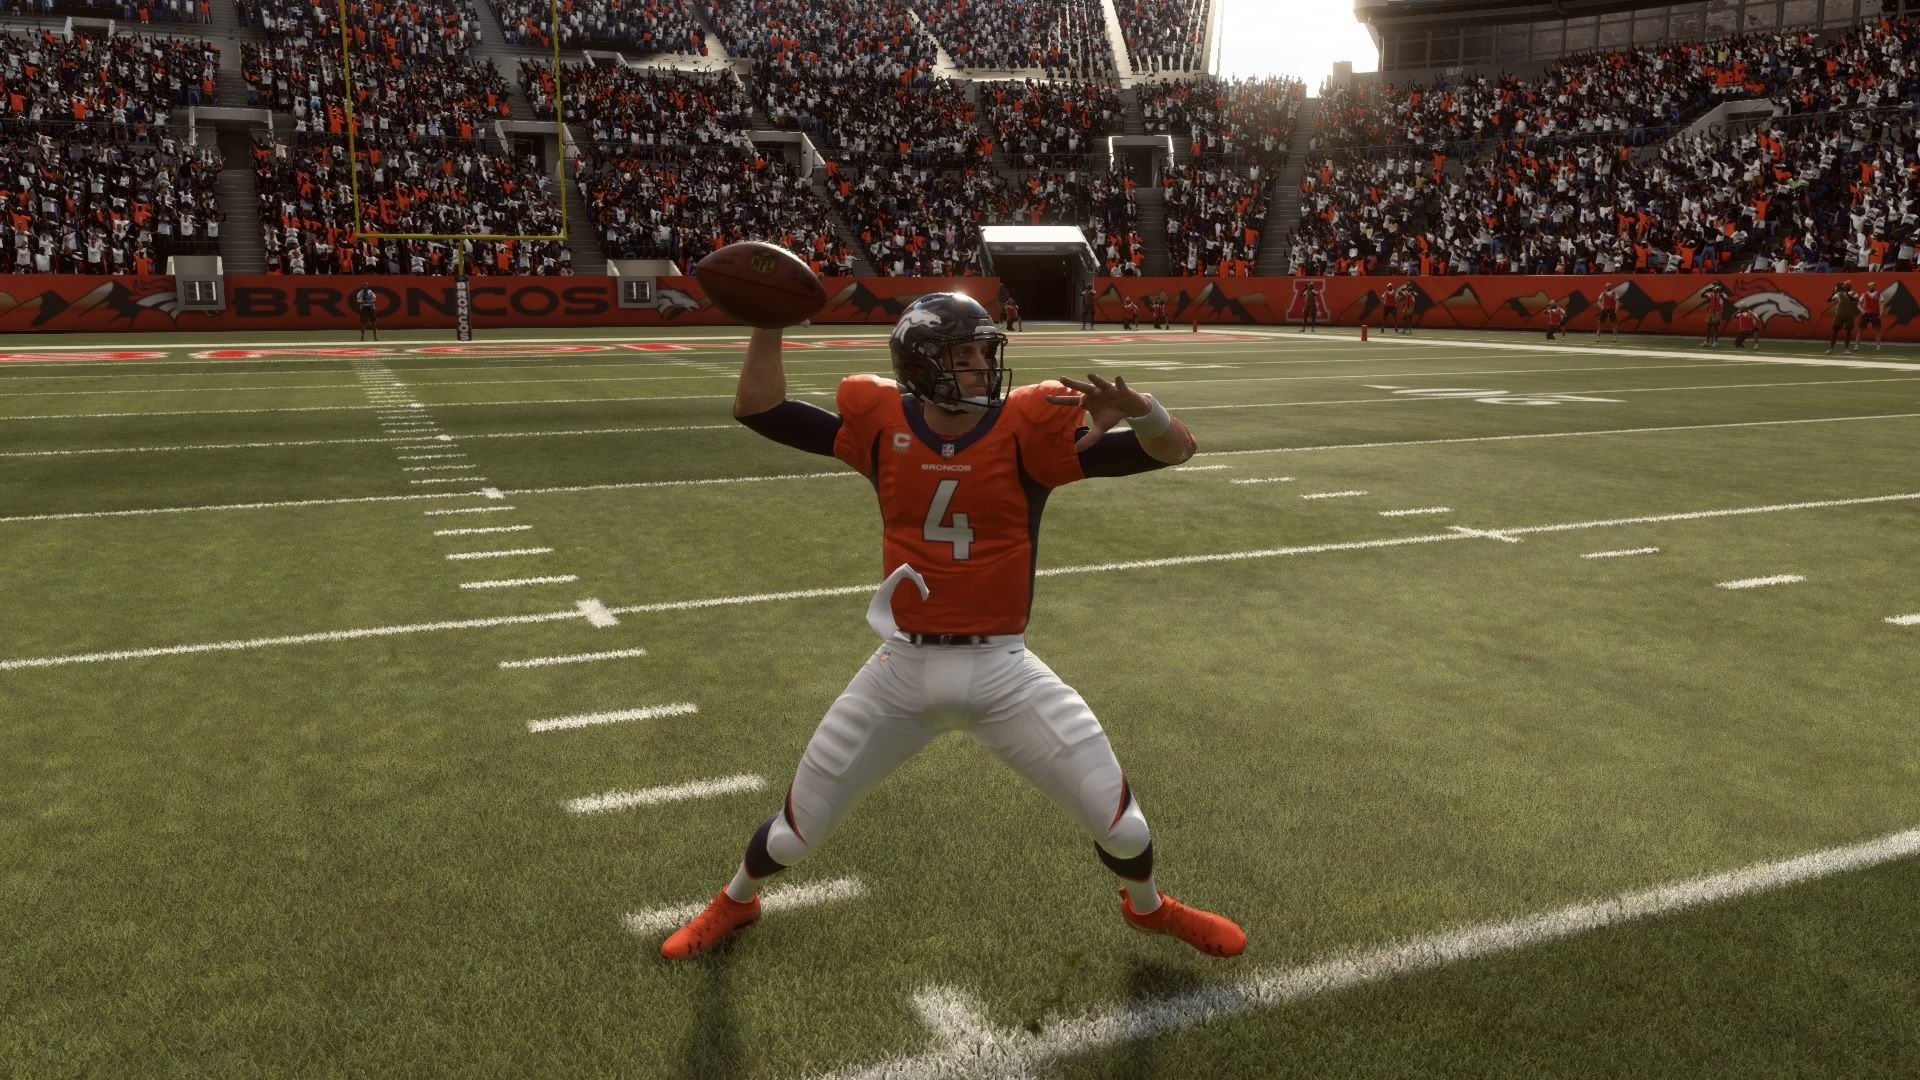 1920x1080 Madden NFL 19 simulation: Here's how the Broncos fared in the 2018 season